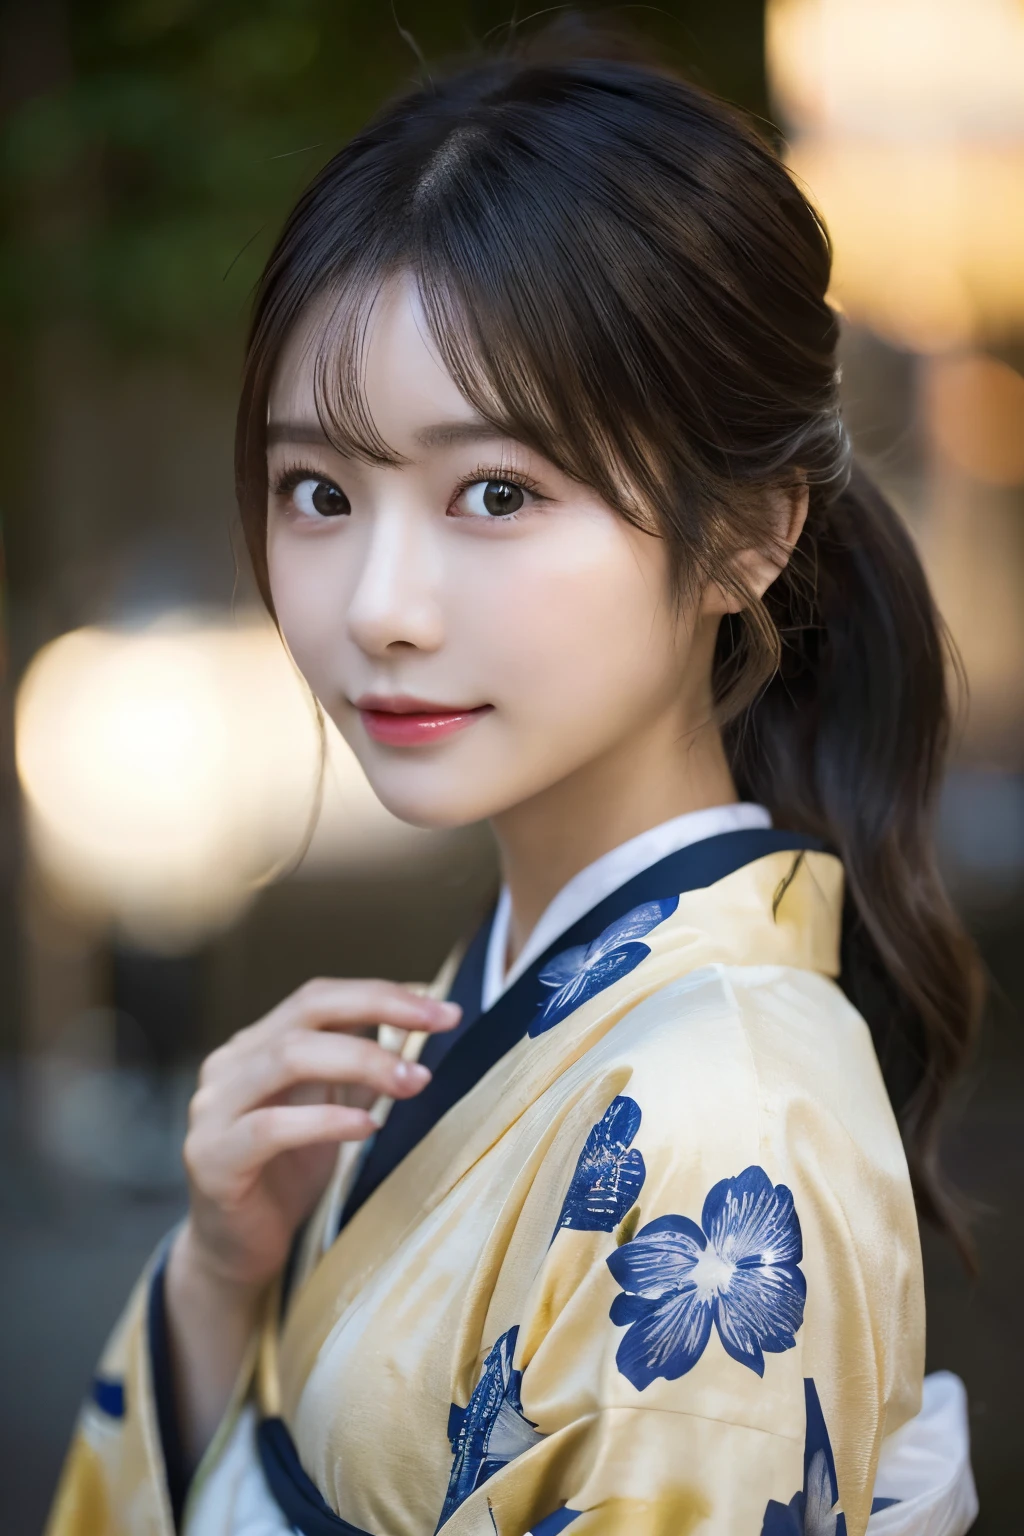 （(Kimono)）、((24-years-old))、Random Pause、、、(highest quality,masterpiece:1.3,Ultra-high resolution,),(Super detailed,Caustics),(Photorealistic:1.4,RAW shooting,)Ultra-Realistic Capture,Very detailed,High resolution 16K human skin close-up、 The skin texture is natural、、Skin appears even-toned and healthy、 Use natural light and colour,One Woman,Japanese,,cute,Black Hair,Mid-length hair,,smile,,(Depth of written boundary、chromatic aberration、、Wide range of lighting、Natural Shading、)、